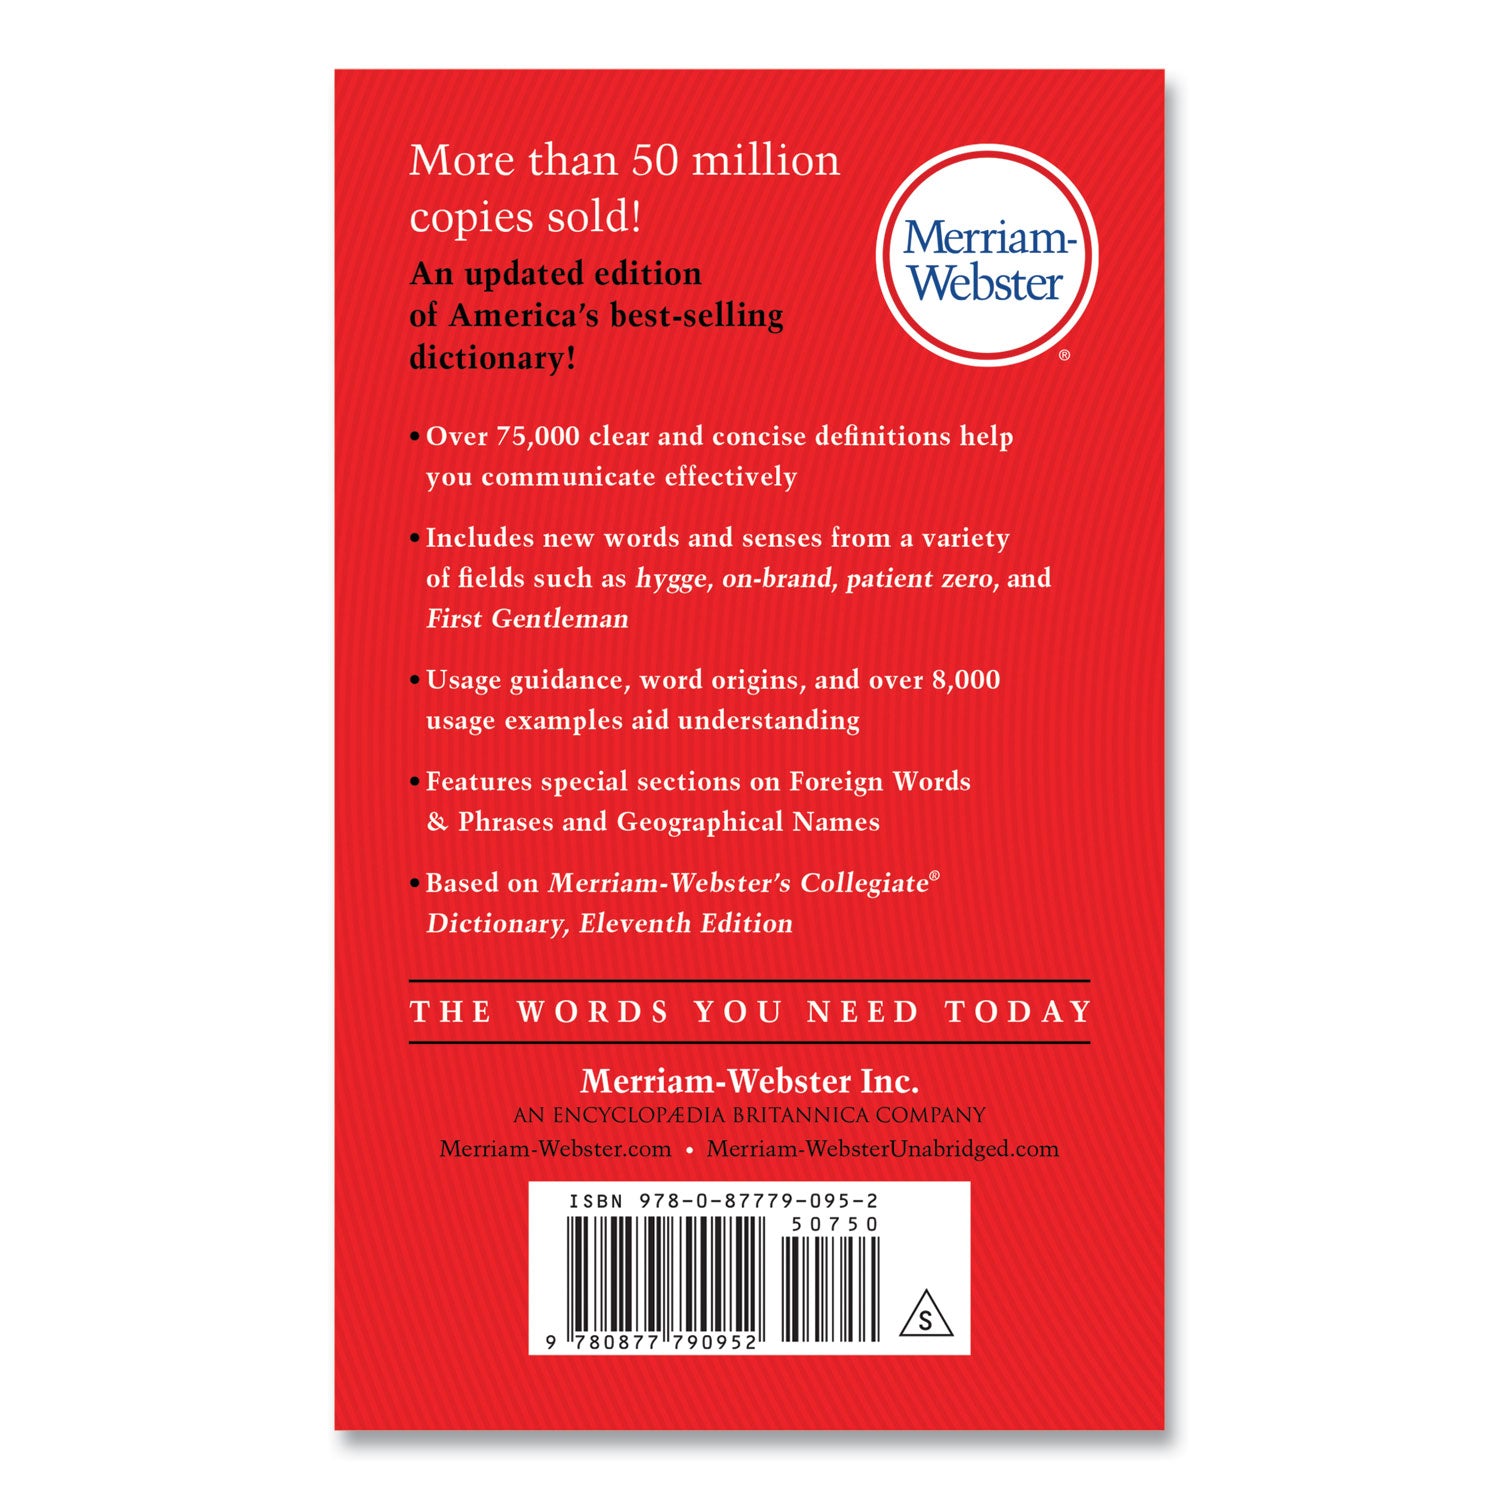 the-merriam-webster-dictionary-revised-edition-paperback-960-pages_mer2952 - 2